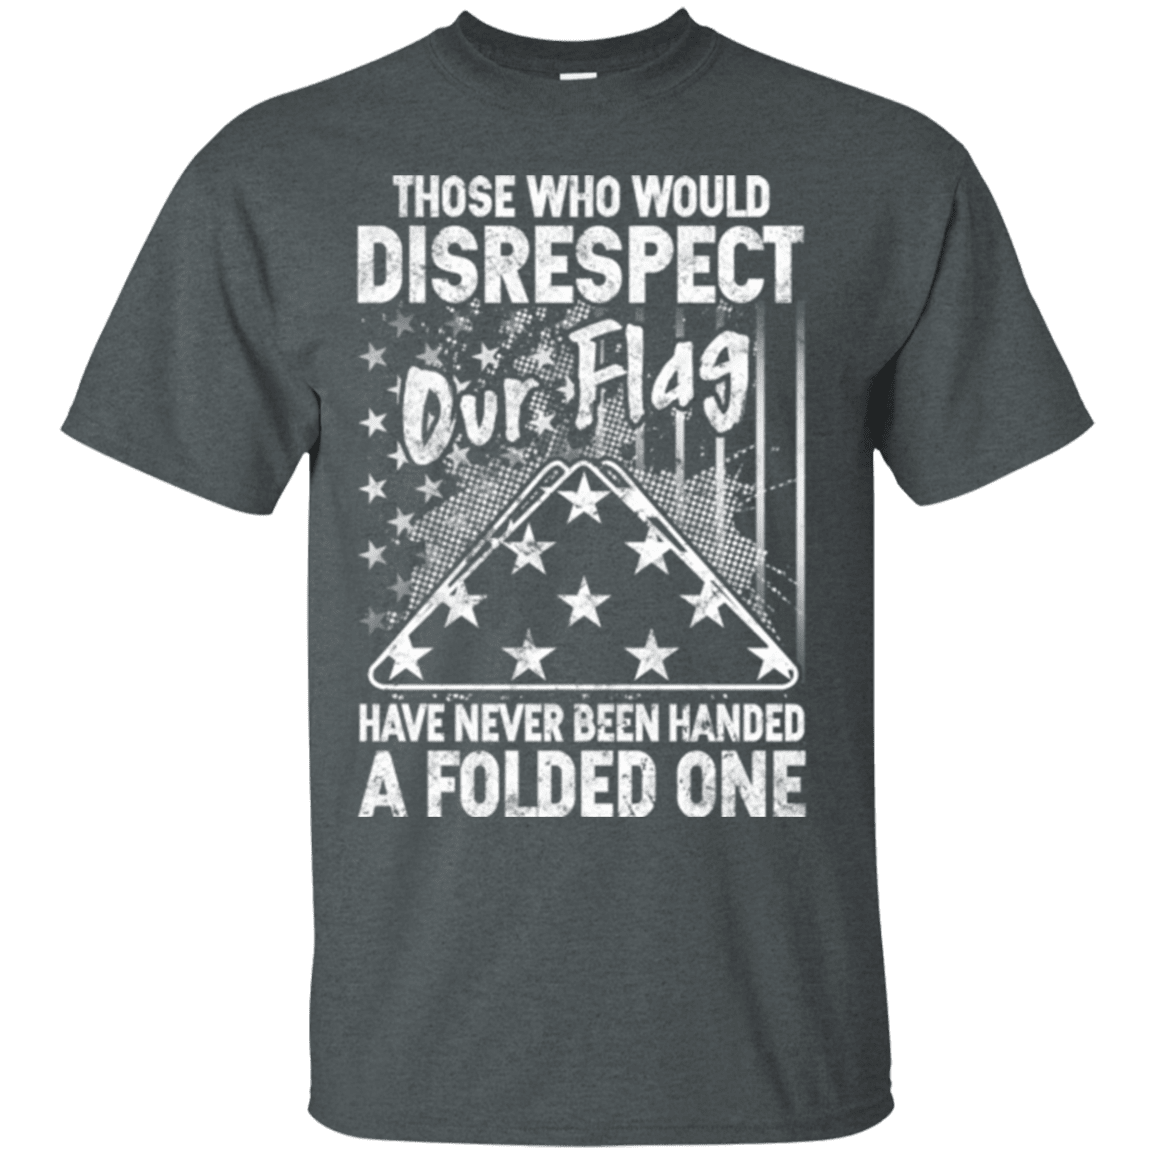 Military T-Shirt "THOSE WHO WOULD DISRESPECT OUR FLAG"-TShirt-General-Veterans Nation